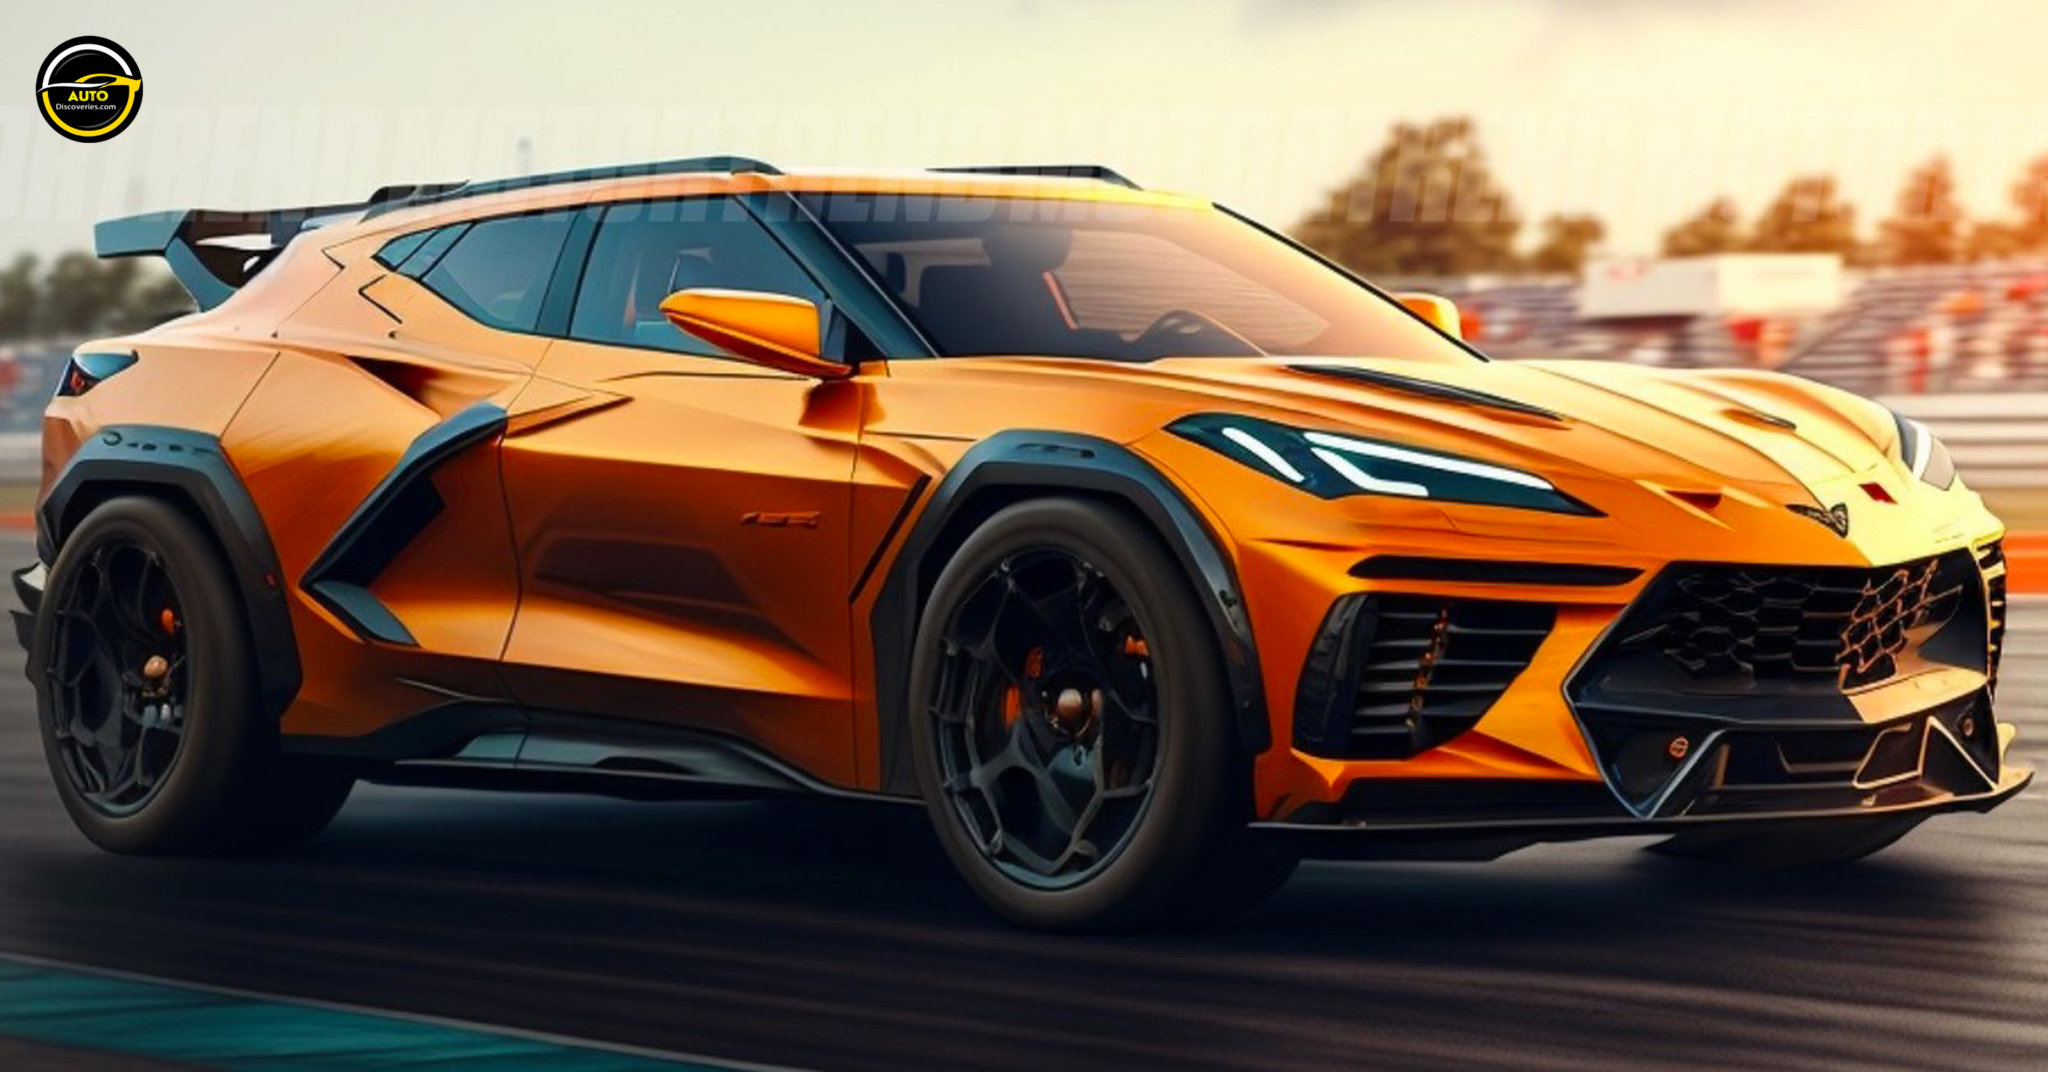 Chevrolet Corvette Brand Coming In 2025 With Electric SUV And Sedan